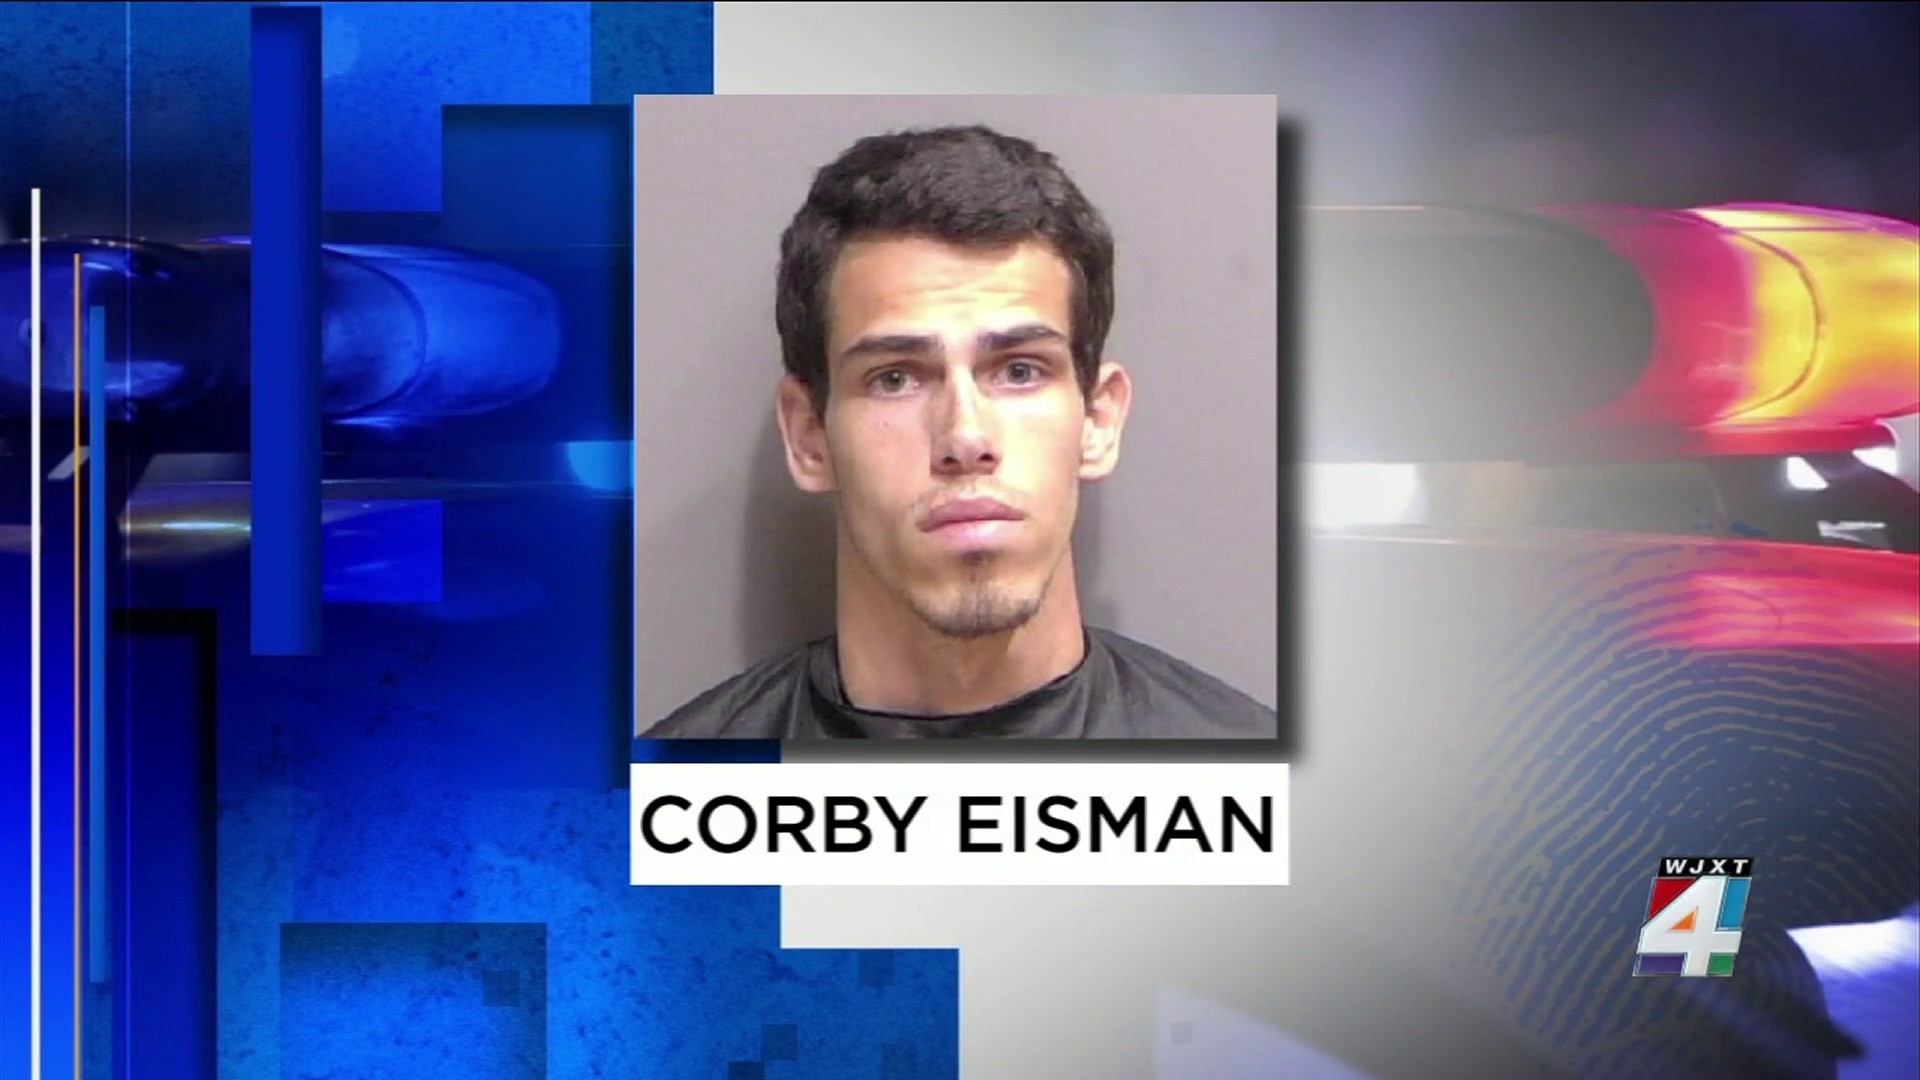 Man accused of using social media to lure teen to have